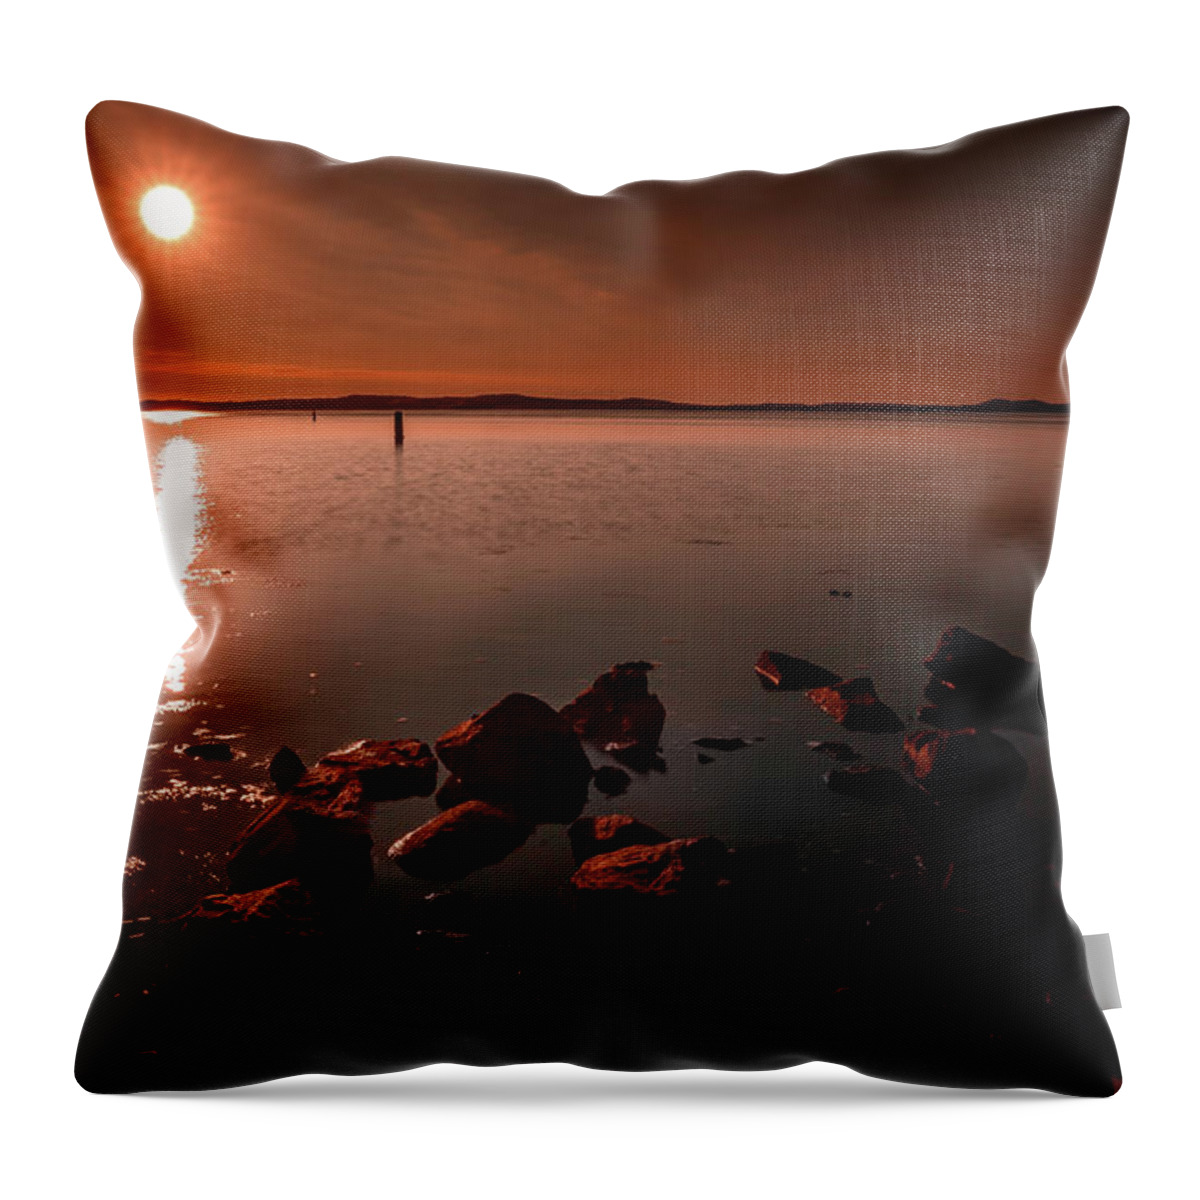 Dramatic Throw Pillow featuring the photograph Transition by Tim Bryan